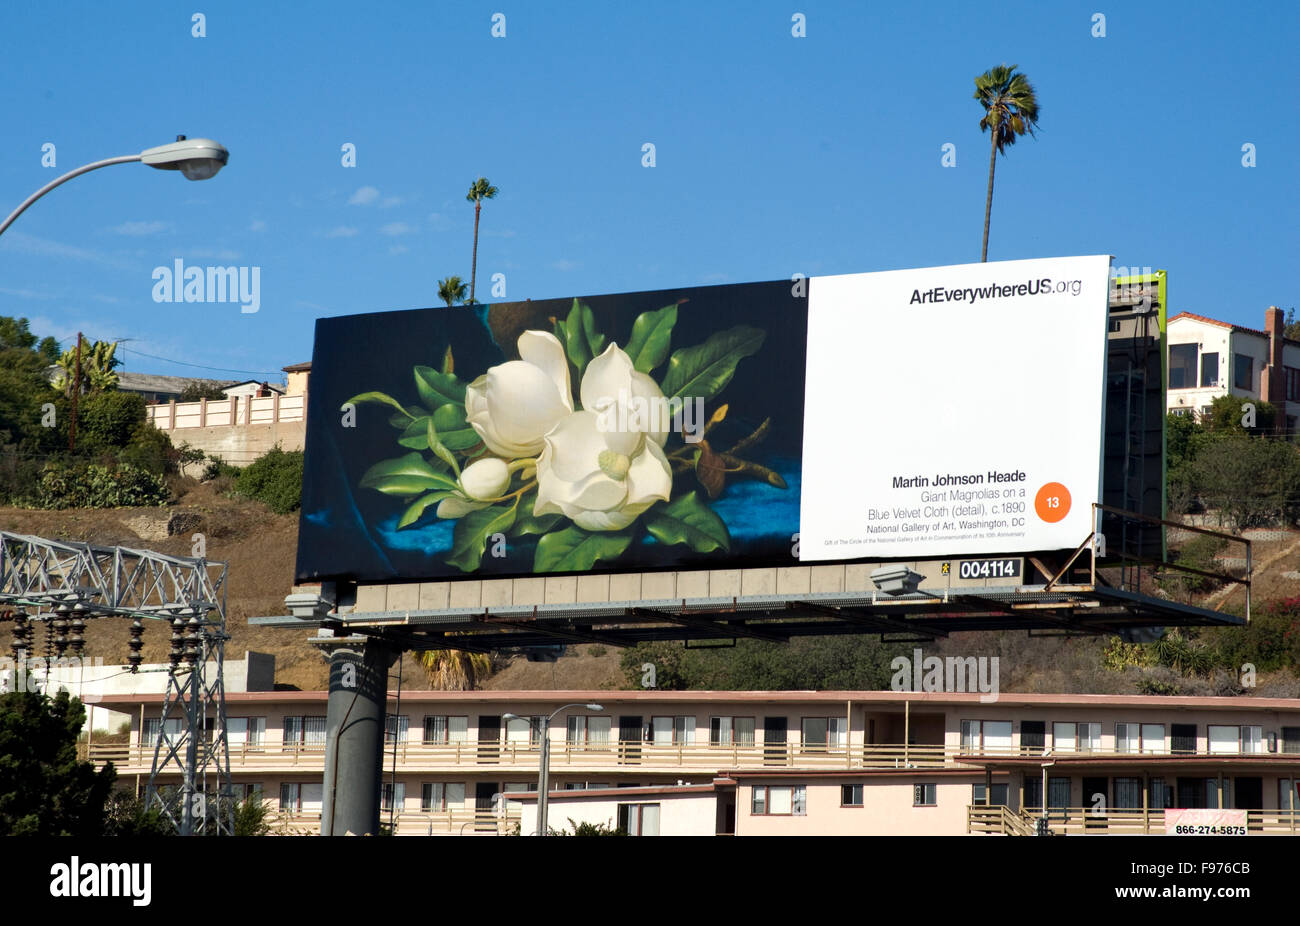 A Martin Johnson Heade painting appears on a billboard  in Inglewood, California during the Art Everywhere event. Stock Photo